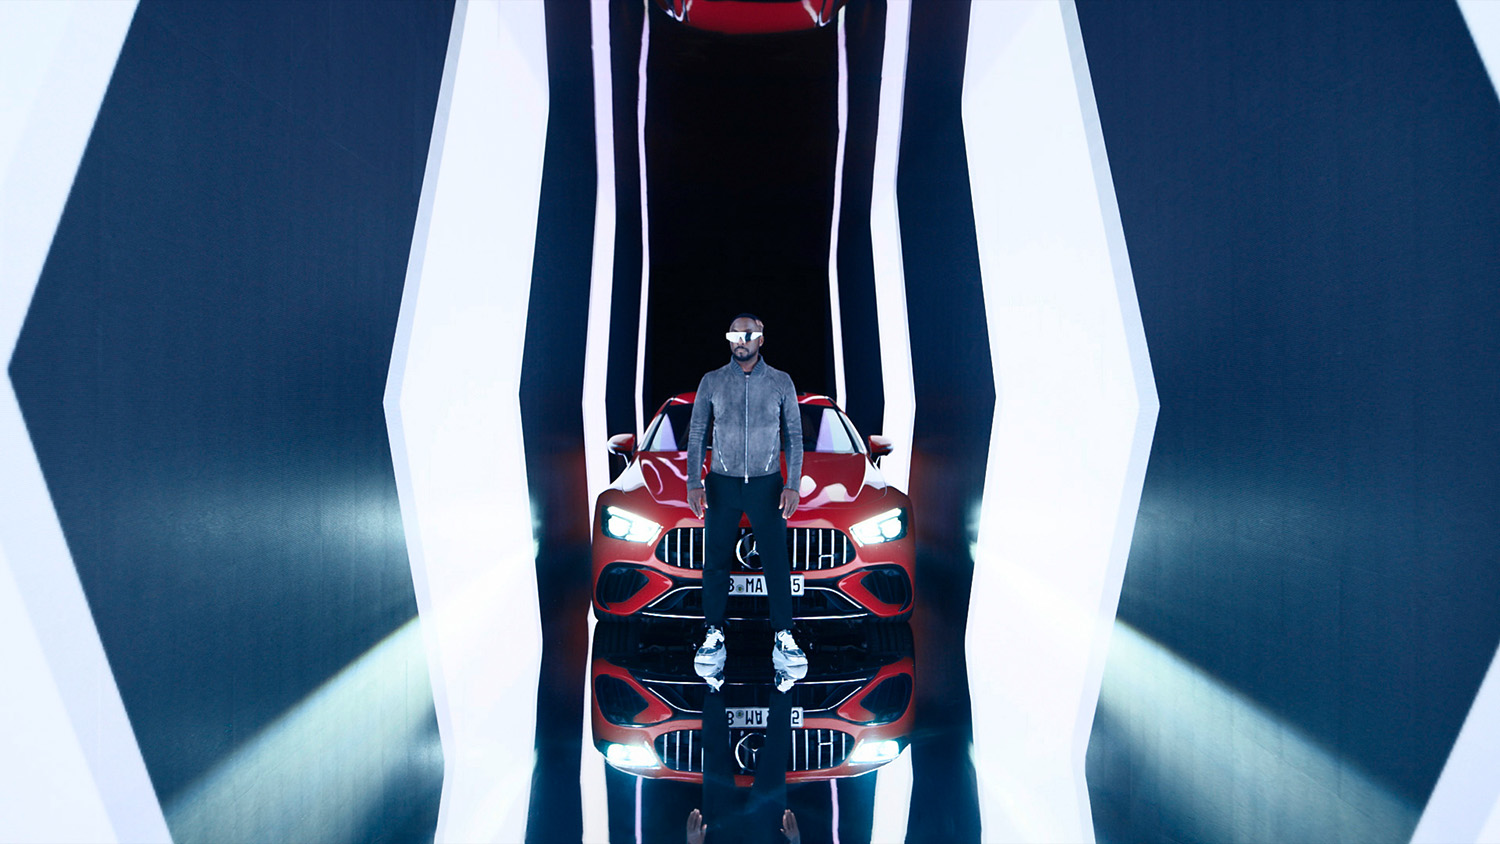 Will.I.Am standing in front of a red Mercedes AMG GT 63 S E Performance during press release photoshoot